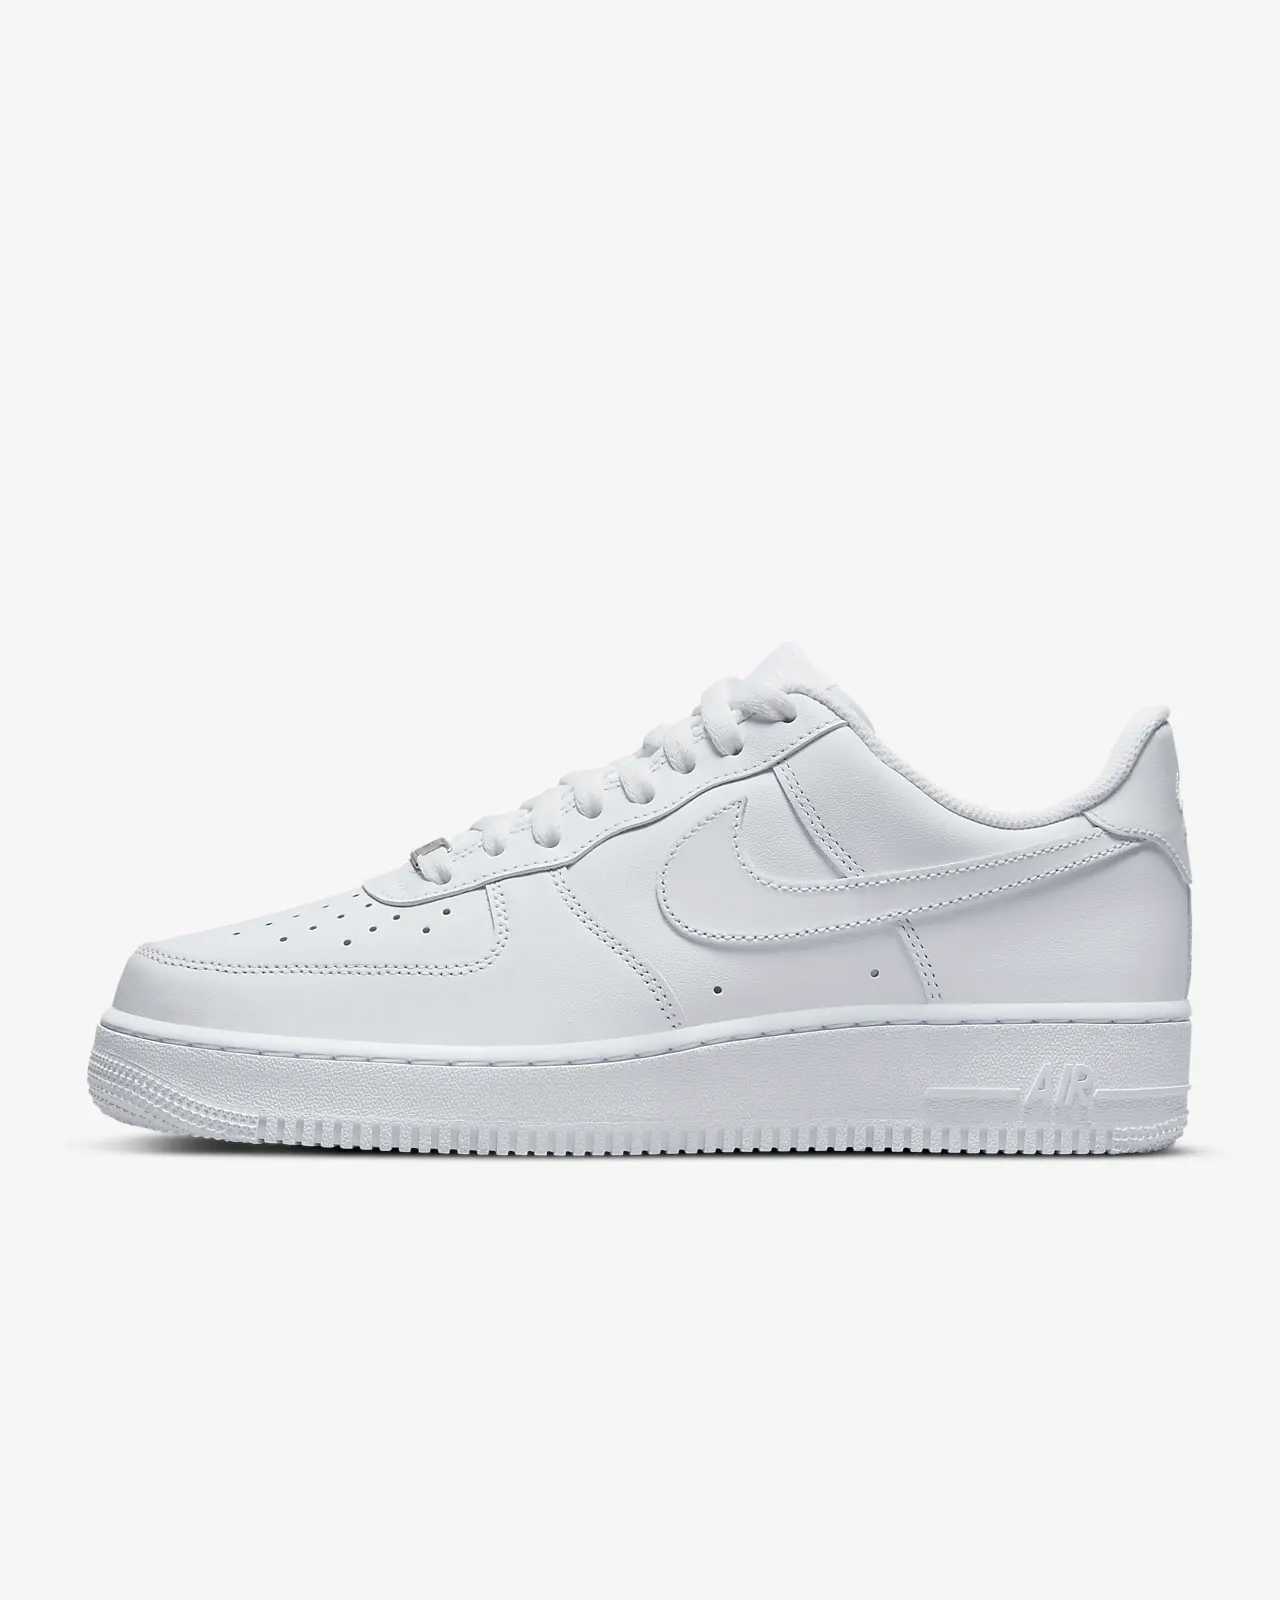 Nike Air Force 1 '07 Trainers White